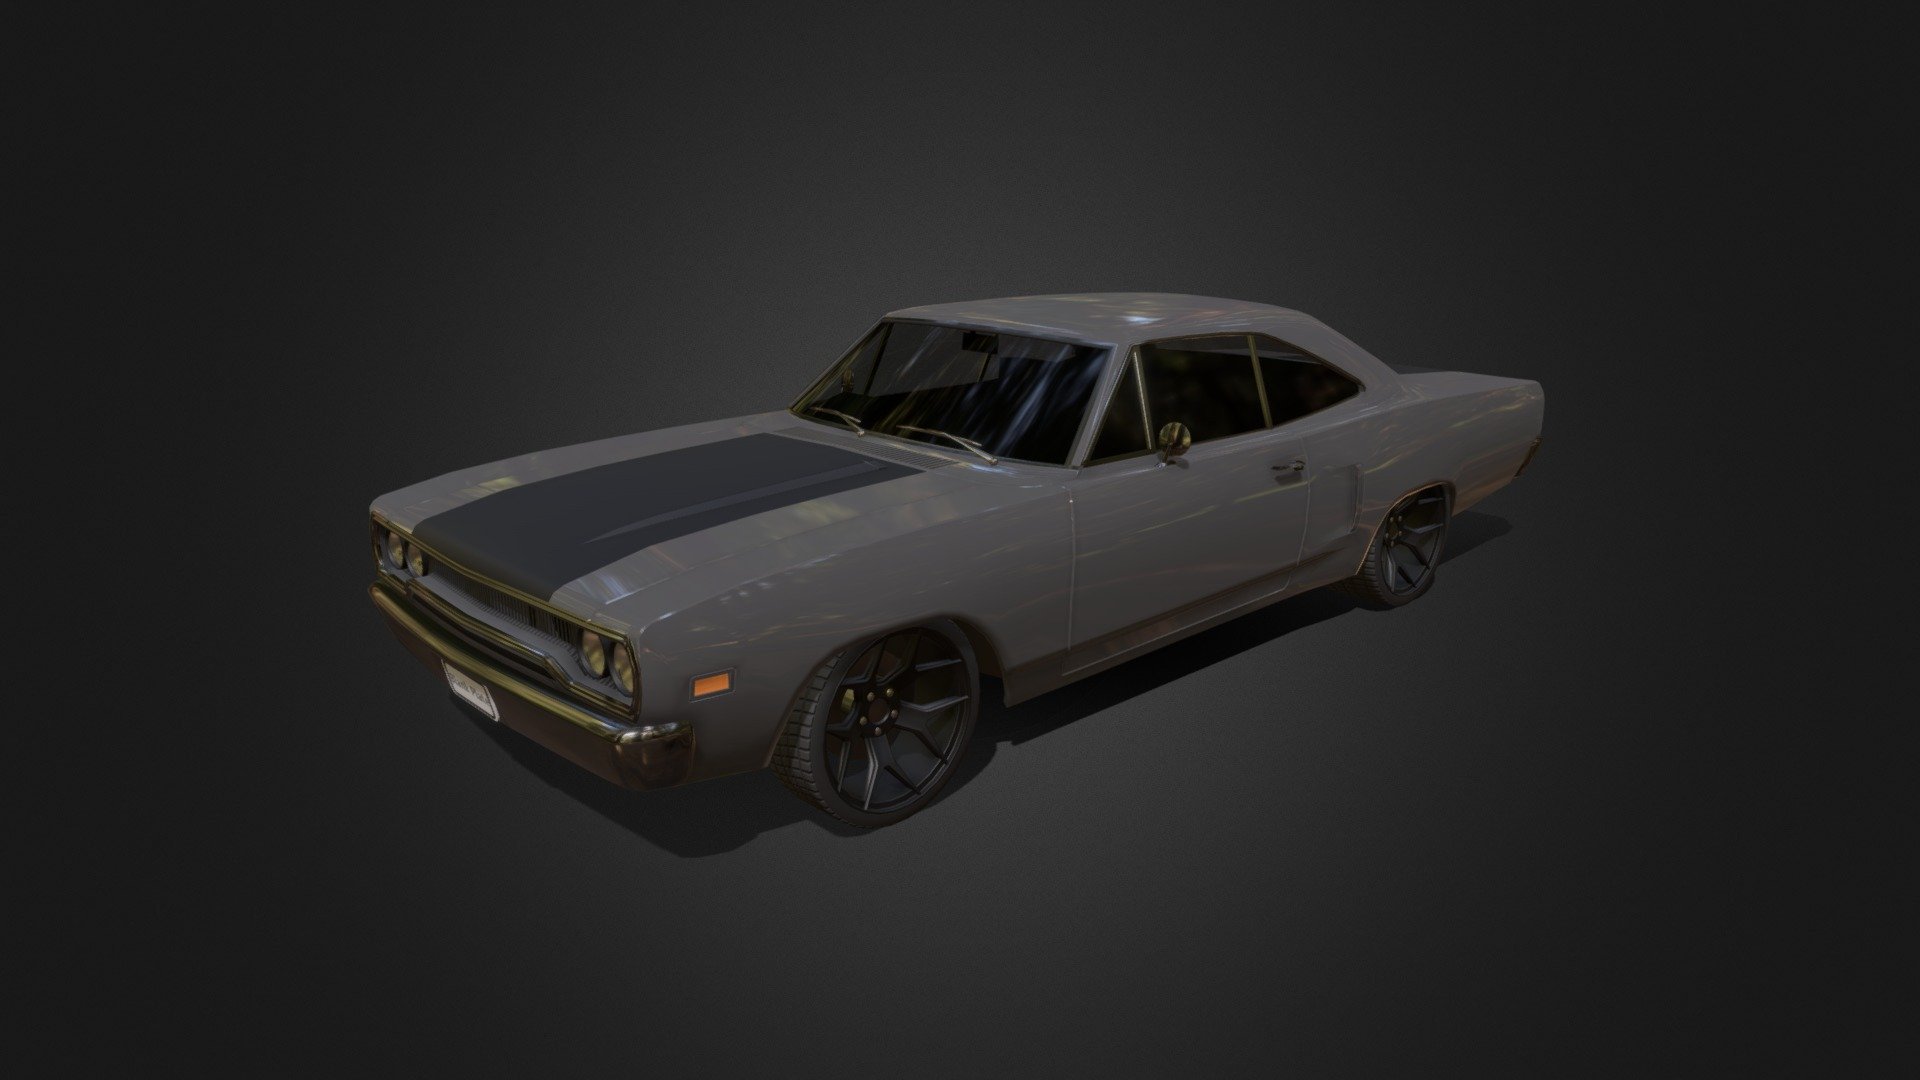 Game-ready vehicle model with Textures, 4 LOD states, and simplified collision meshes.

Vehicle model is based on 1970s car designs with modern wheels 3d model